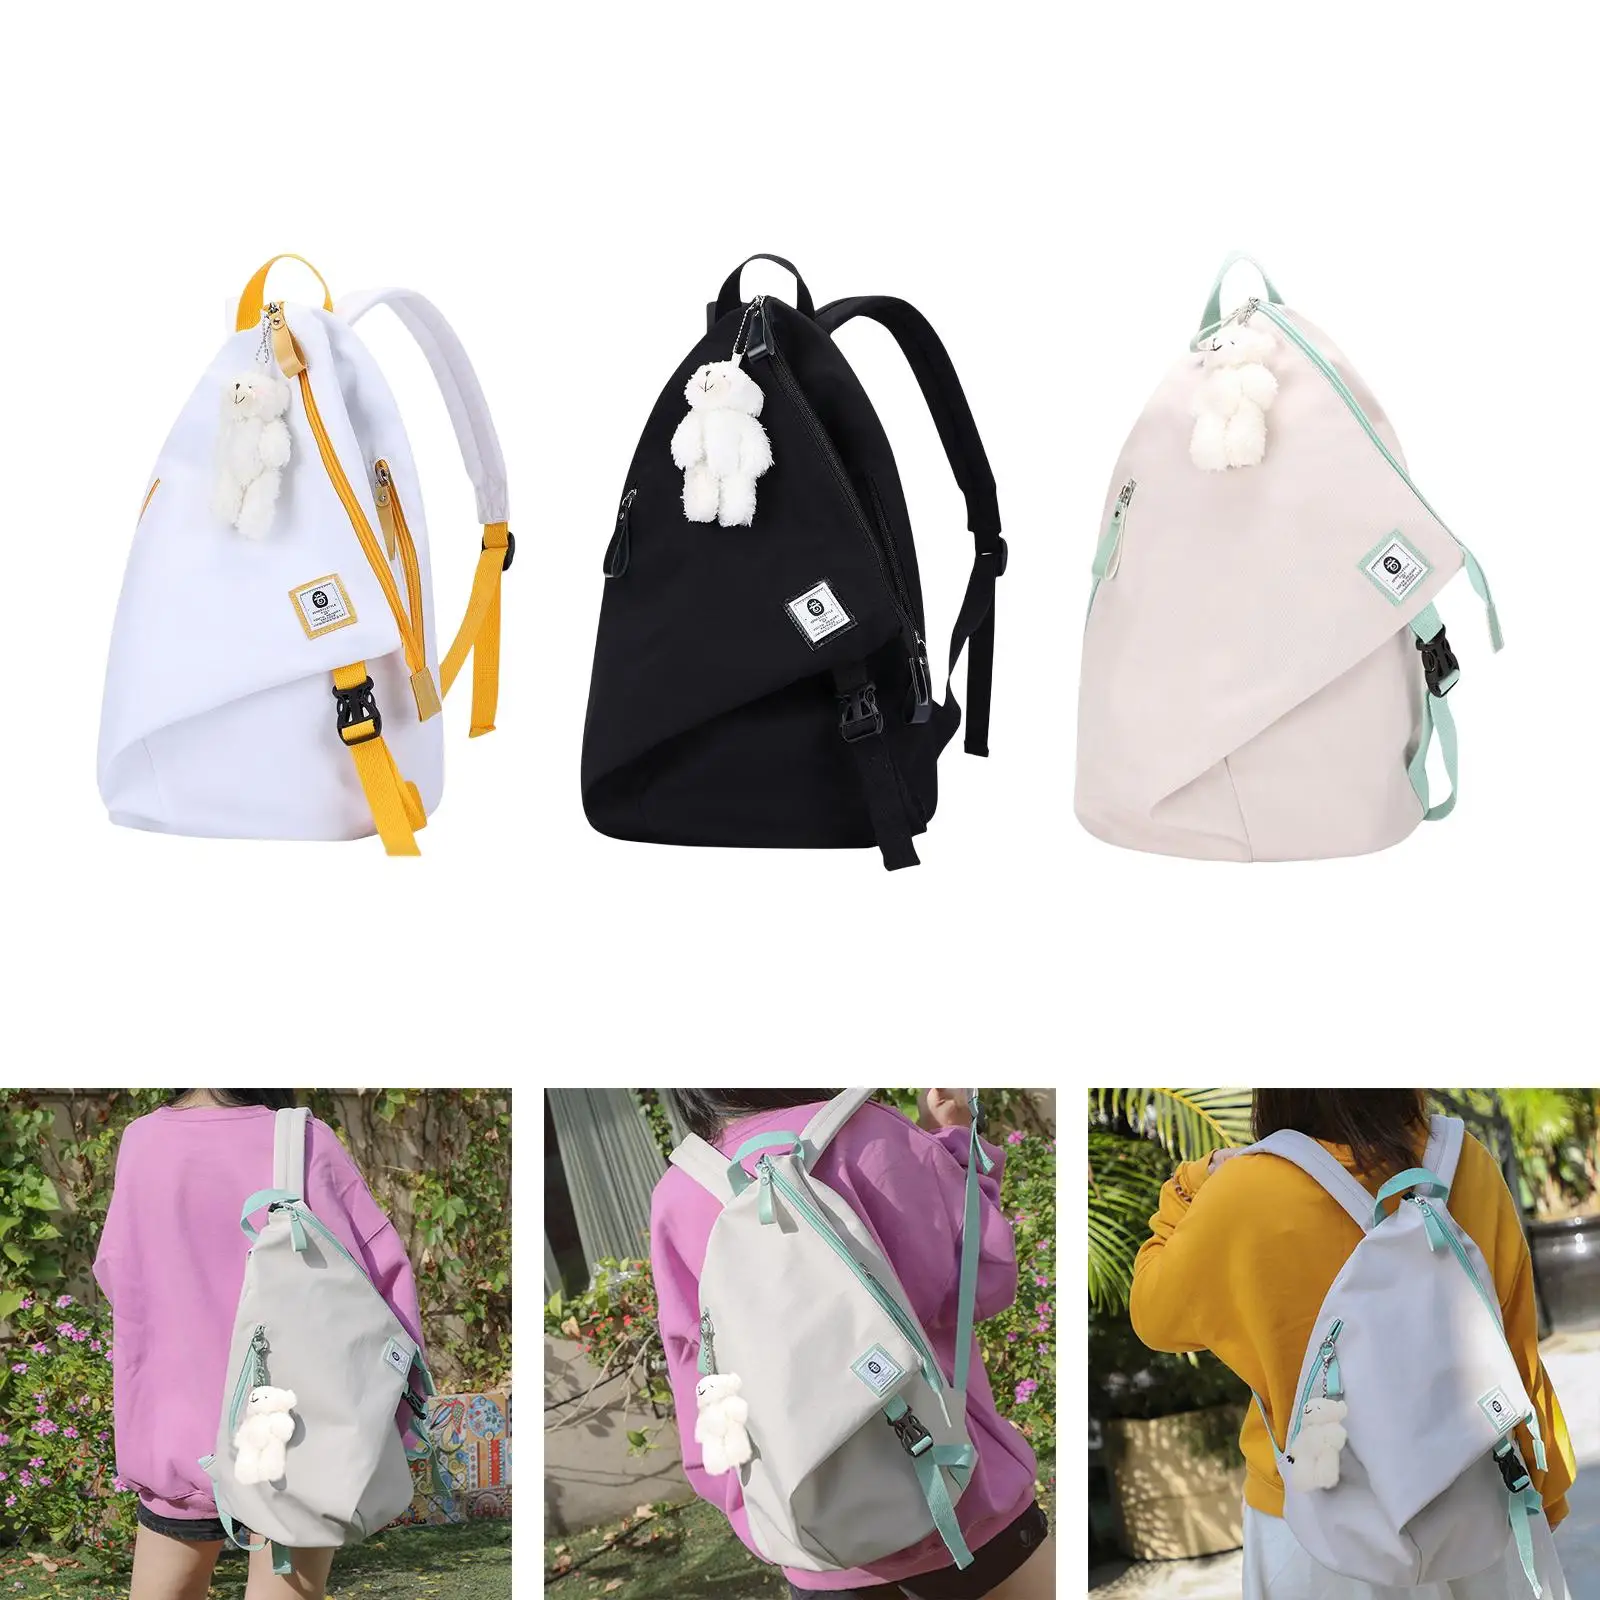 Travel Backpack Water Resistant Laptop Bags for Camping Business Work Hiking